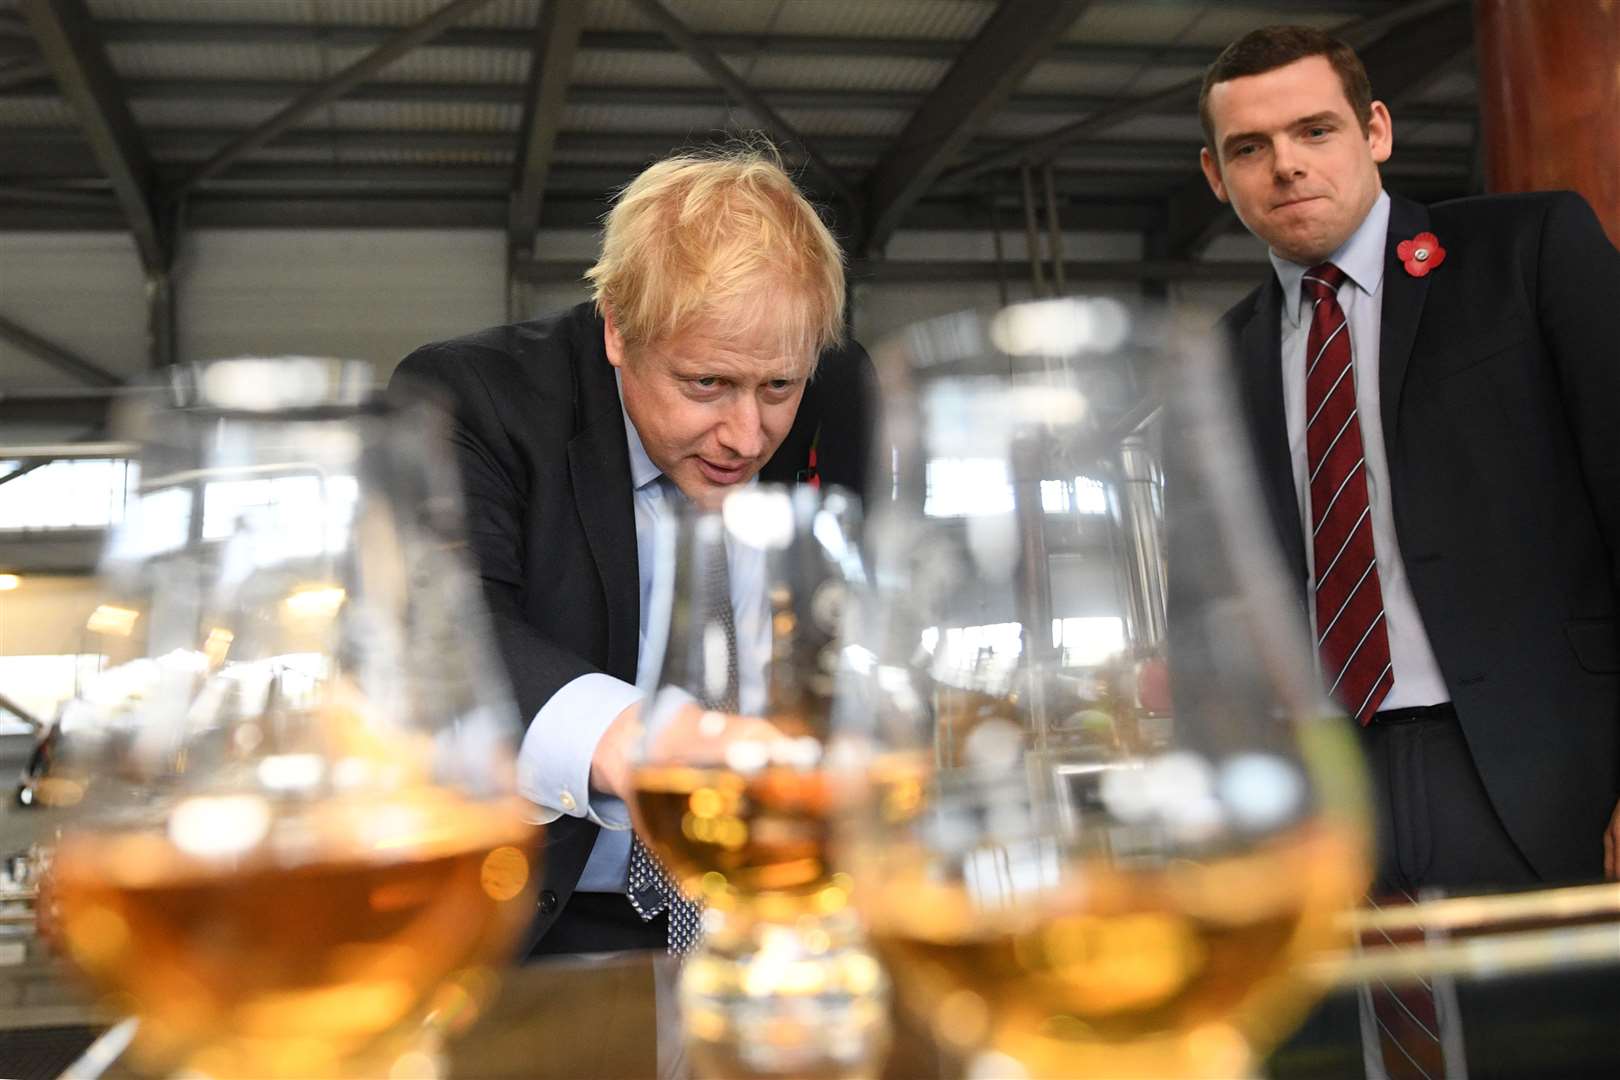 Boris Johnson raising a toast to the Scotch whisky industry with Douglas Ross during a previous visit to Moray. The Moray MP and Scottish Conservative leader was one of 148 party members who declared no confidence in the Prime Minister this week.